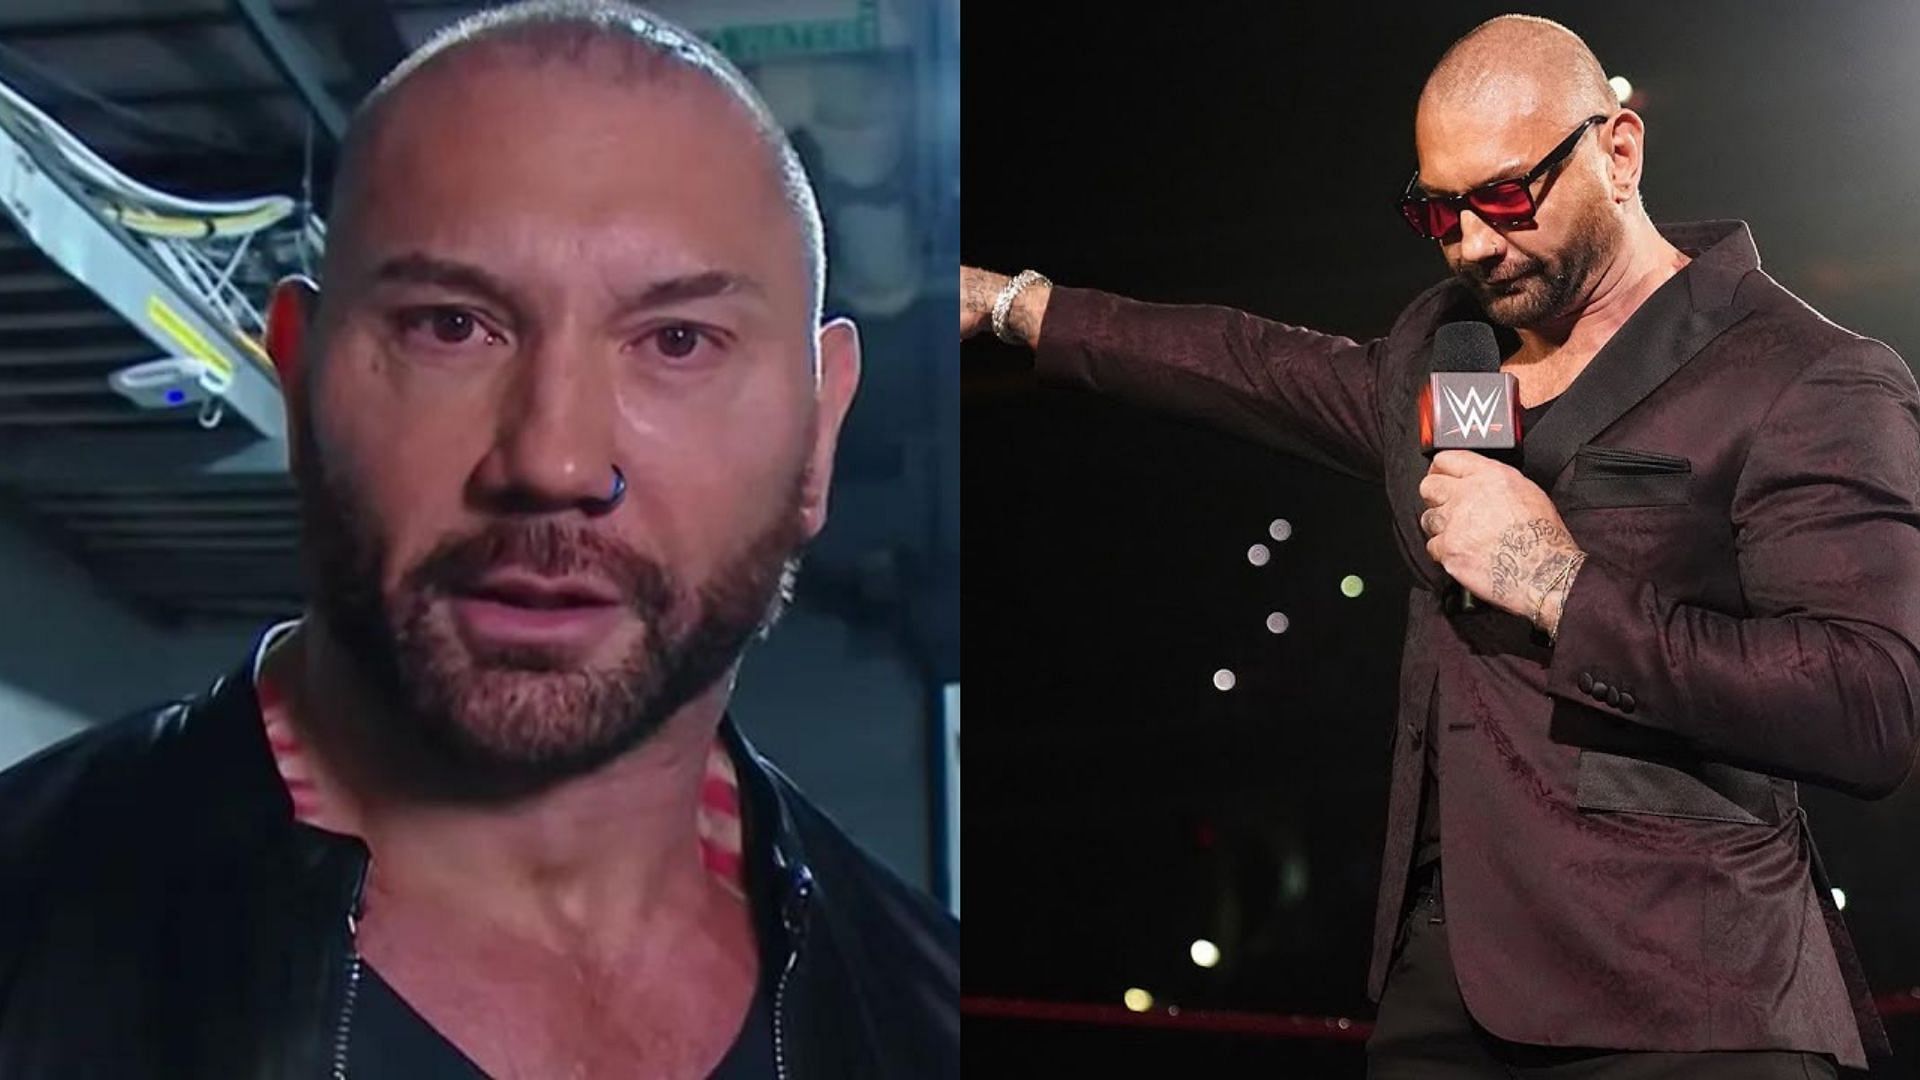 Batista last competed in a WWE match back in 2019